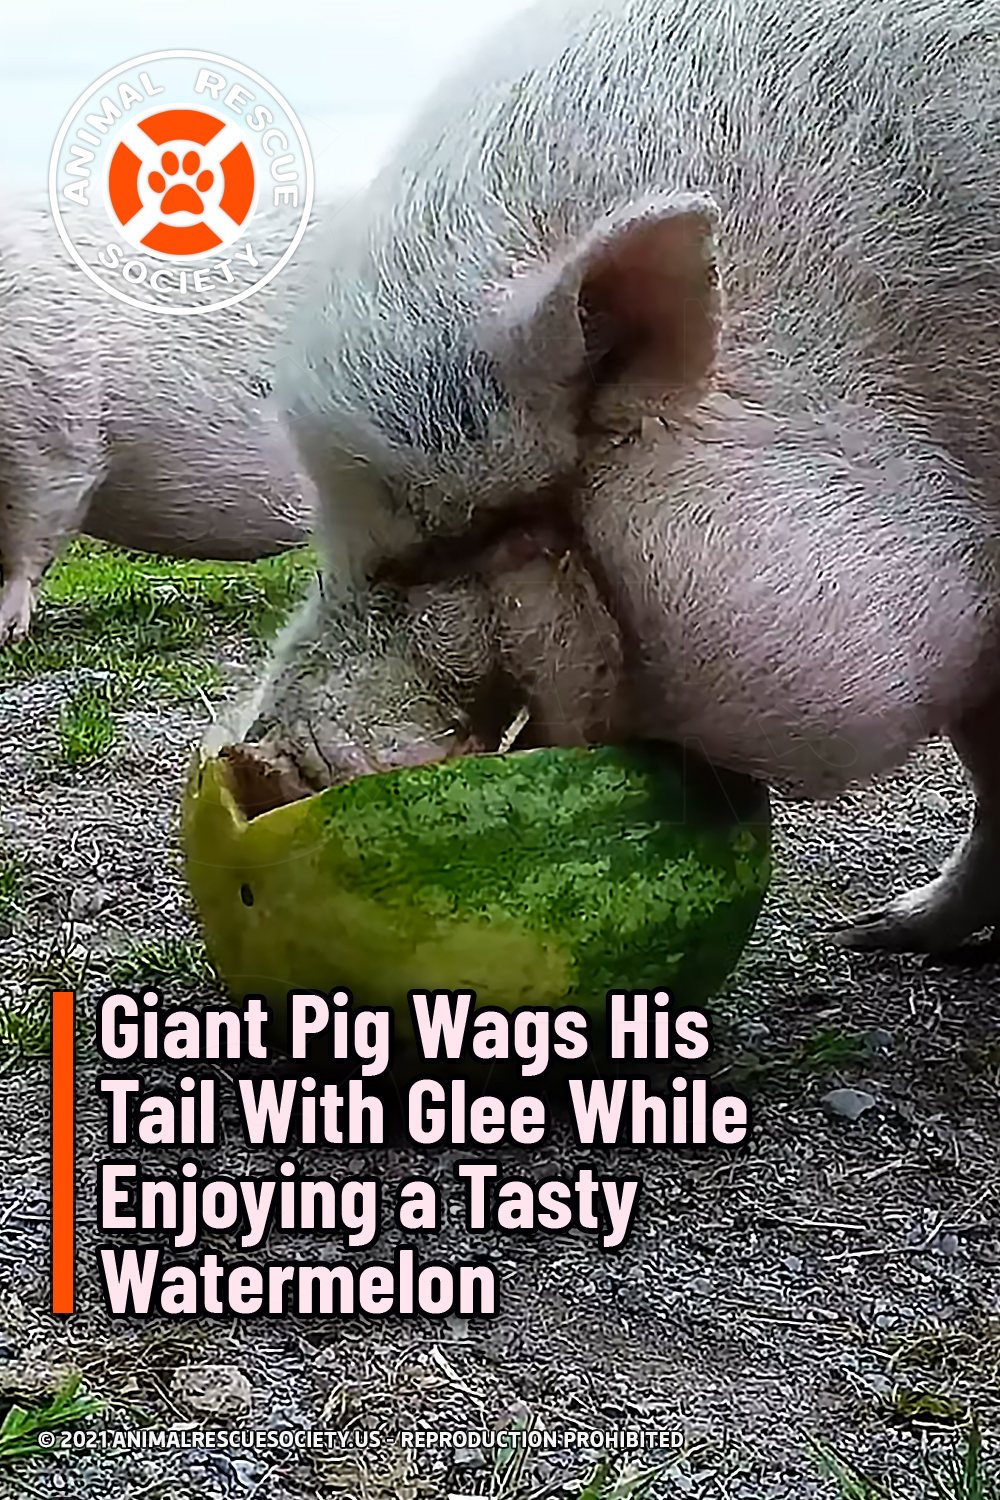 Giant Pig Wags His Tail With Glee While Enjoying a Tasty Watermelon